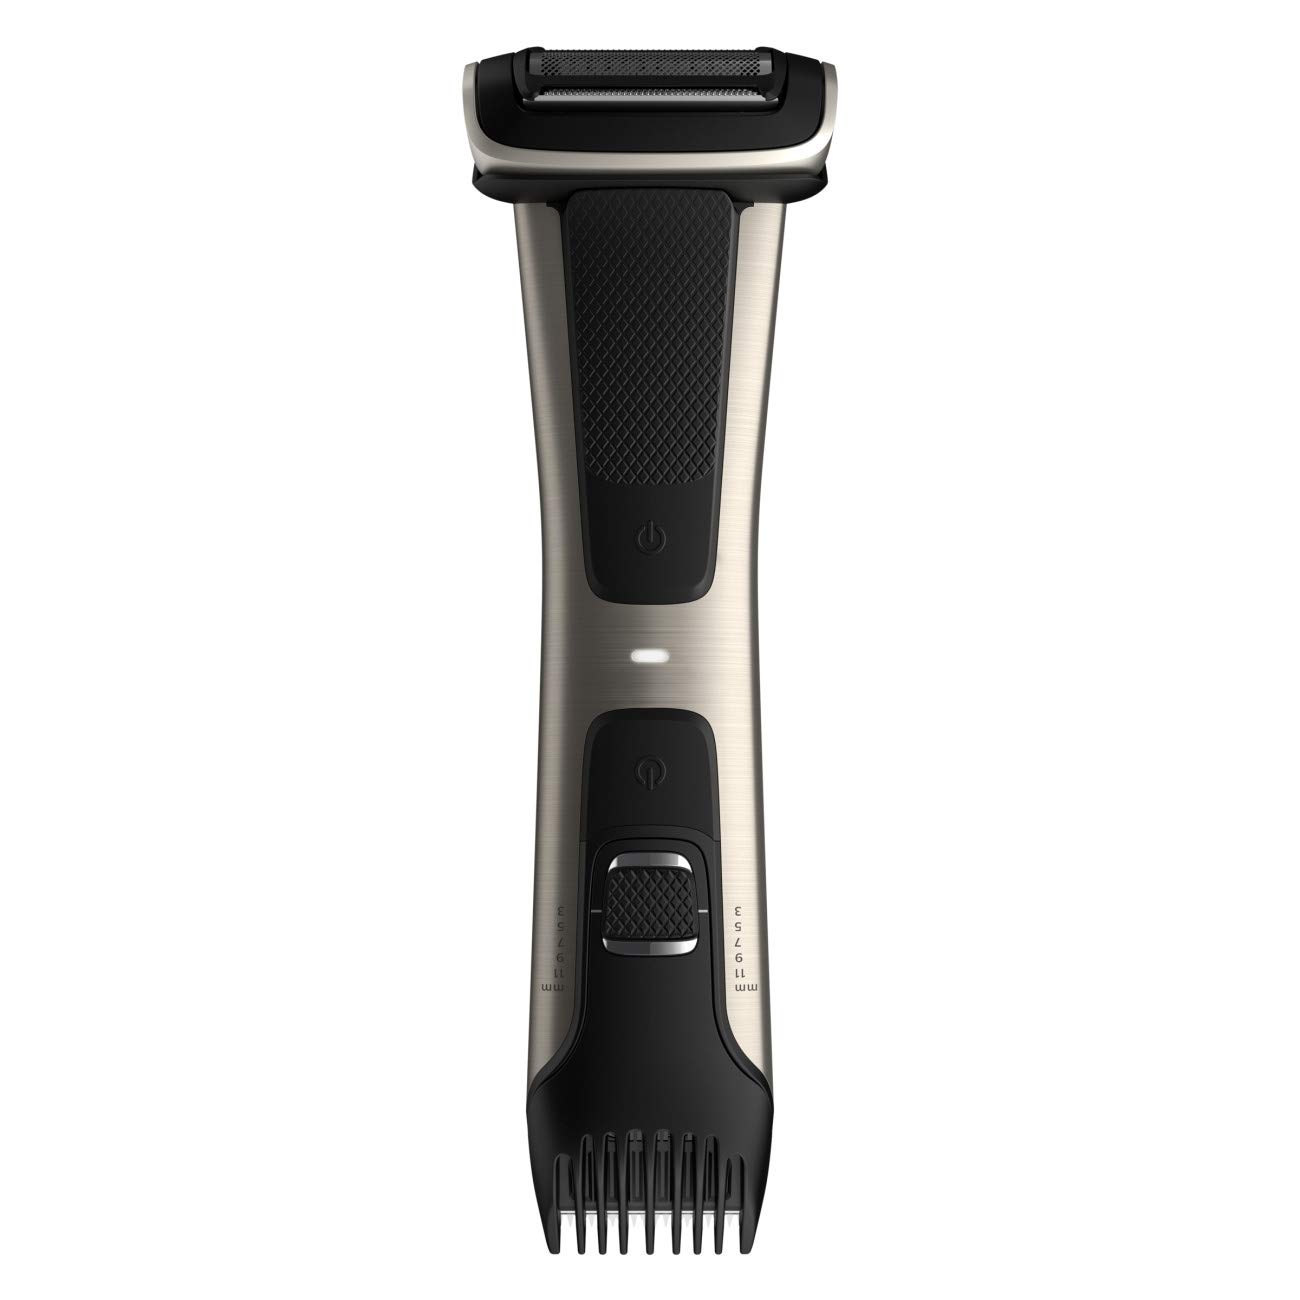 Philips Norelco Bodygroom Series 7000, Showerproof Dual-Sided Body Trimmer and Shaver for Men - $49.95 at Amazon